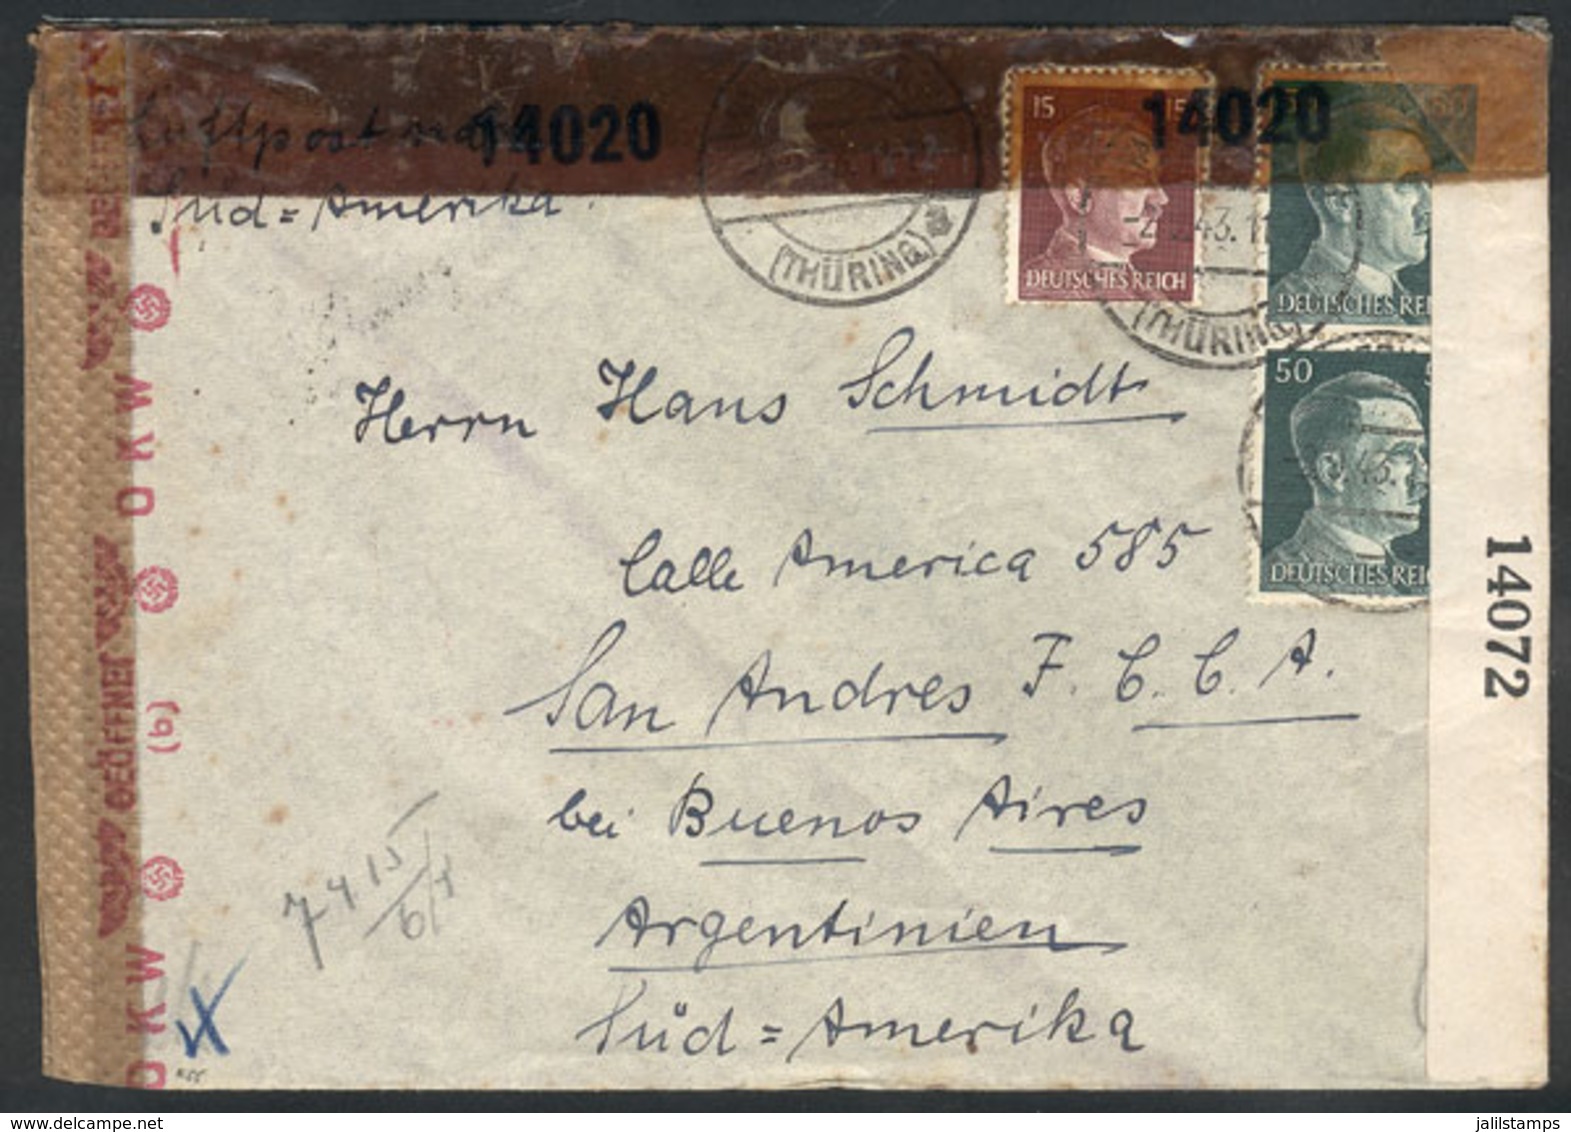 GERMANY: Airmail Cover Sent To Argentina On 2/SE/1943 With Interesting TRIPLE CENSORSHIP, VF Quality! - [Voorlopers